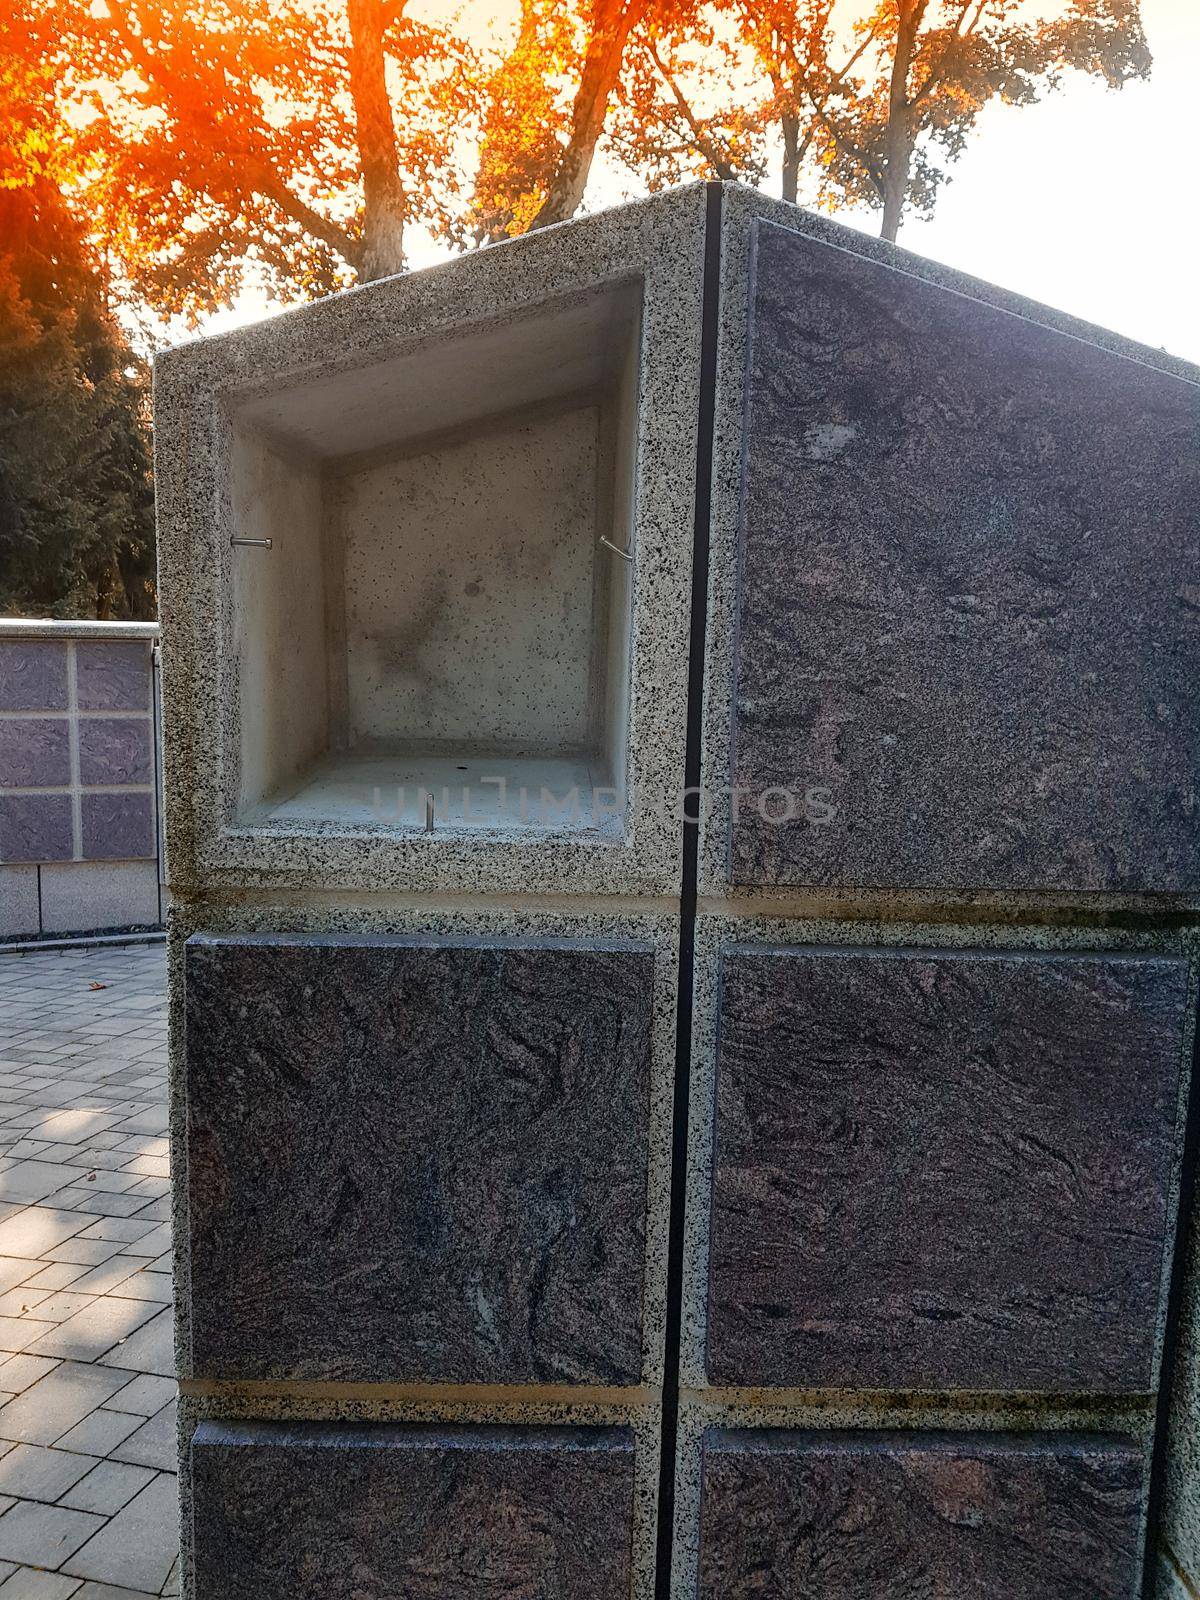 Open columbarium wall in a cemetery where the urn will stand with ashes